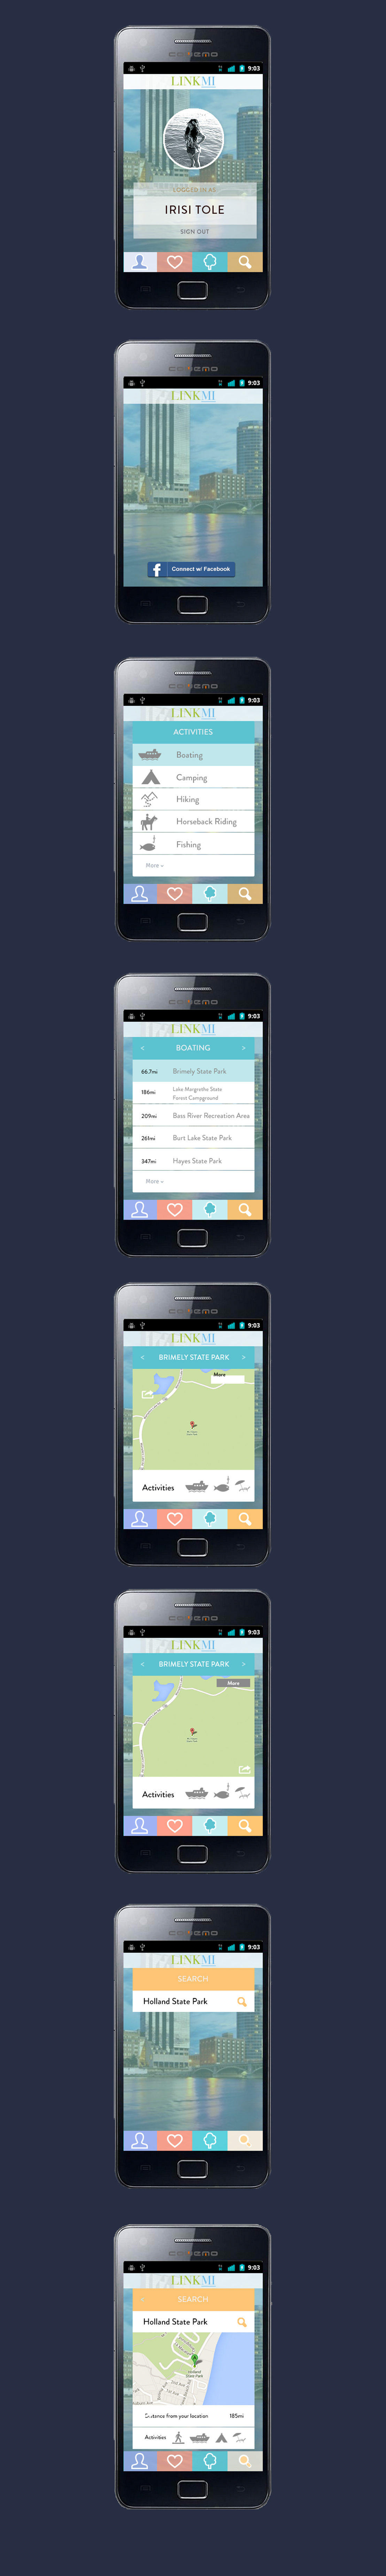 android app location map link UI ux